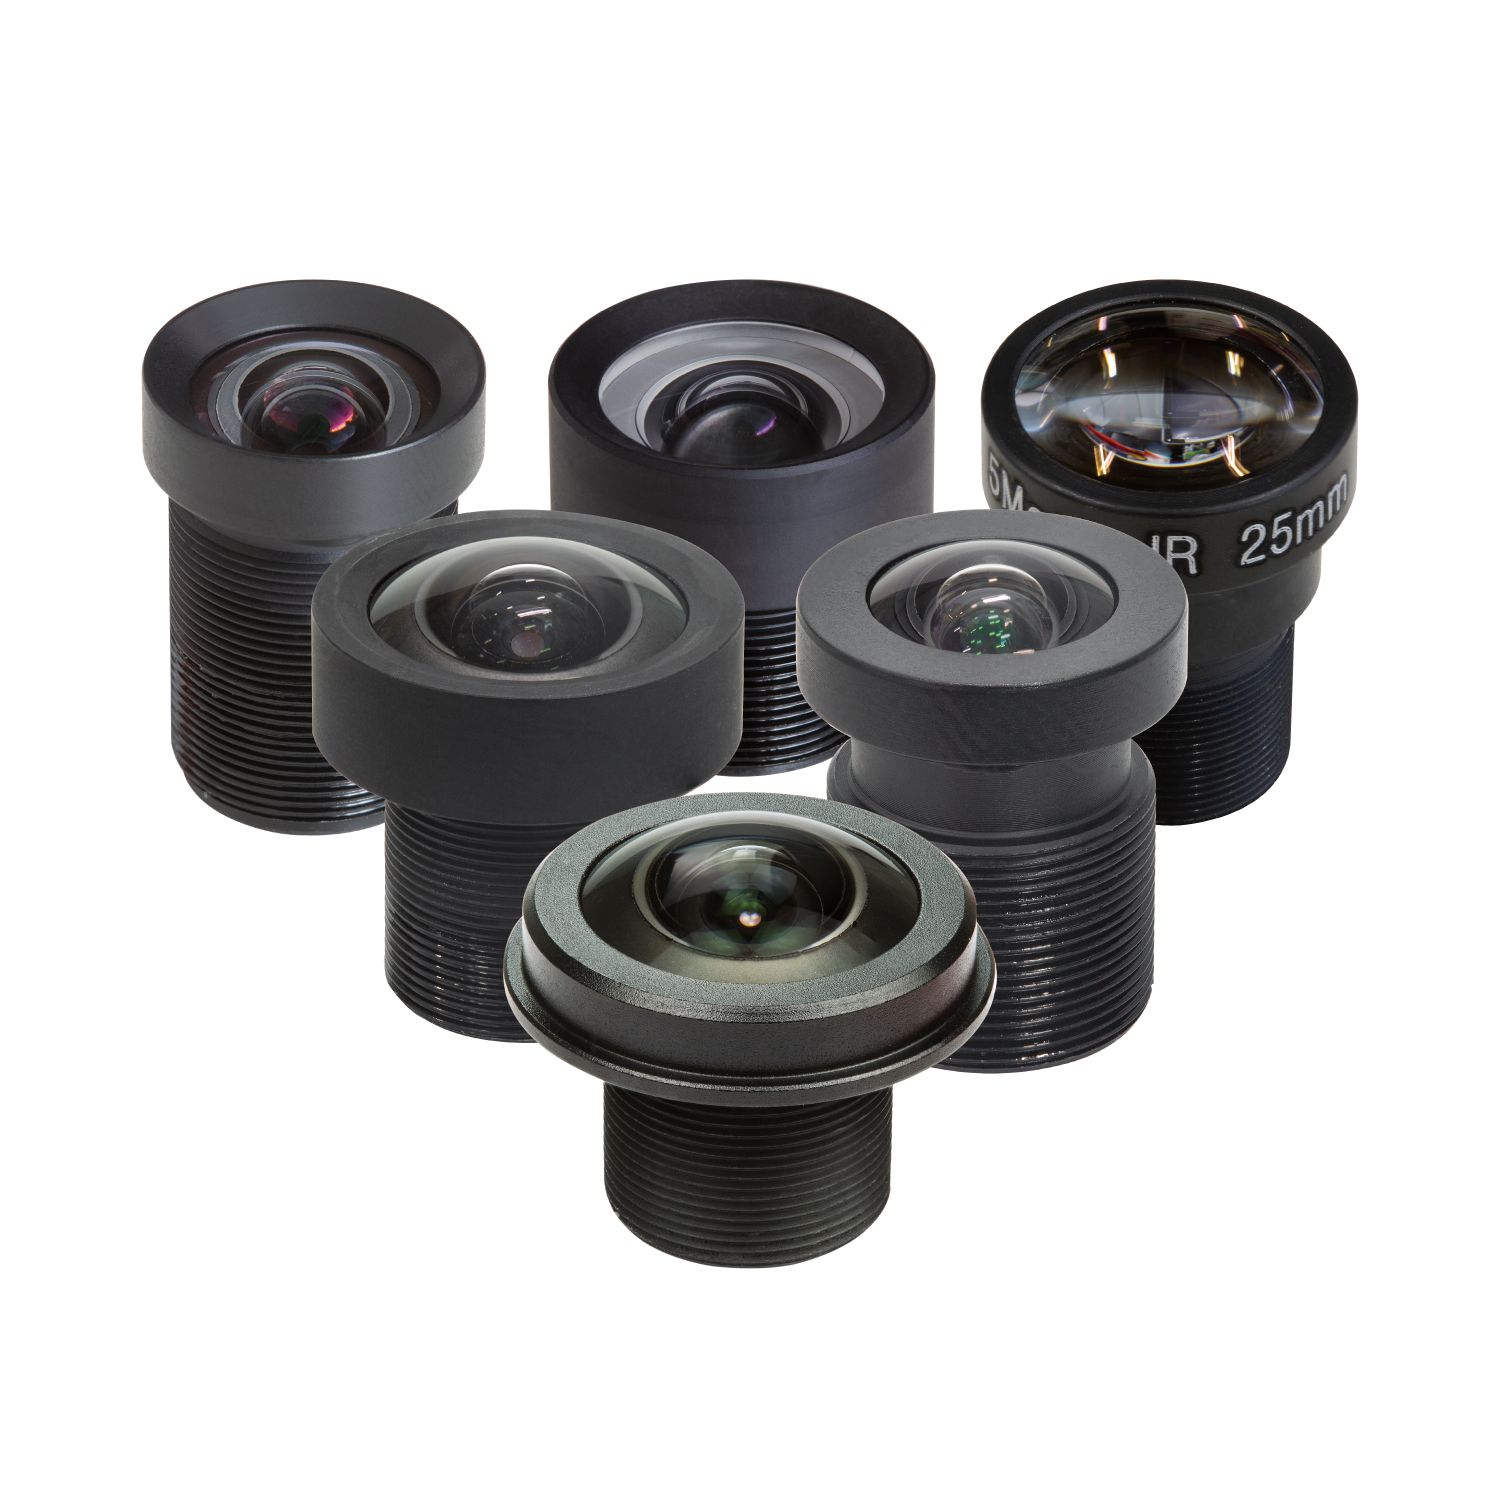 Arducam M12 Lens Kit for Raspberry Pi High Quality IMX477 Camera, Fisheye Wide Angle Telephoto M12 Camera Lenses with Lens Adapter